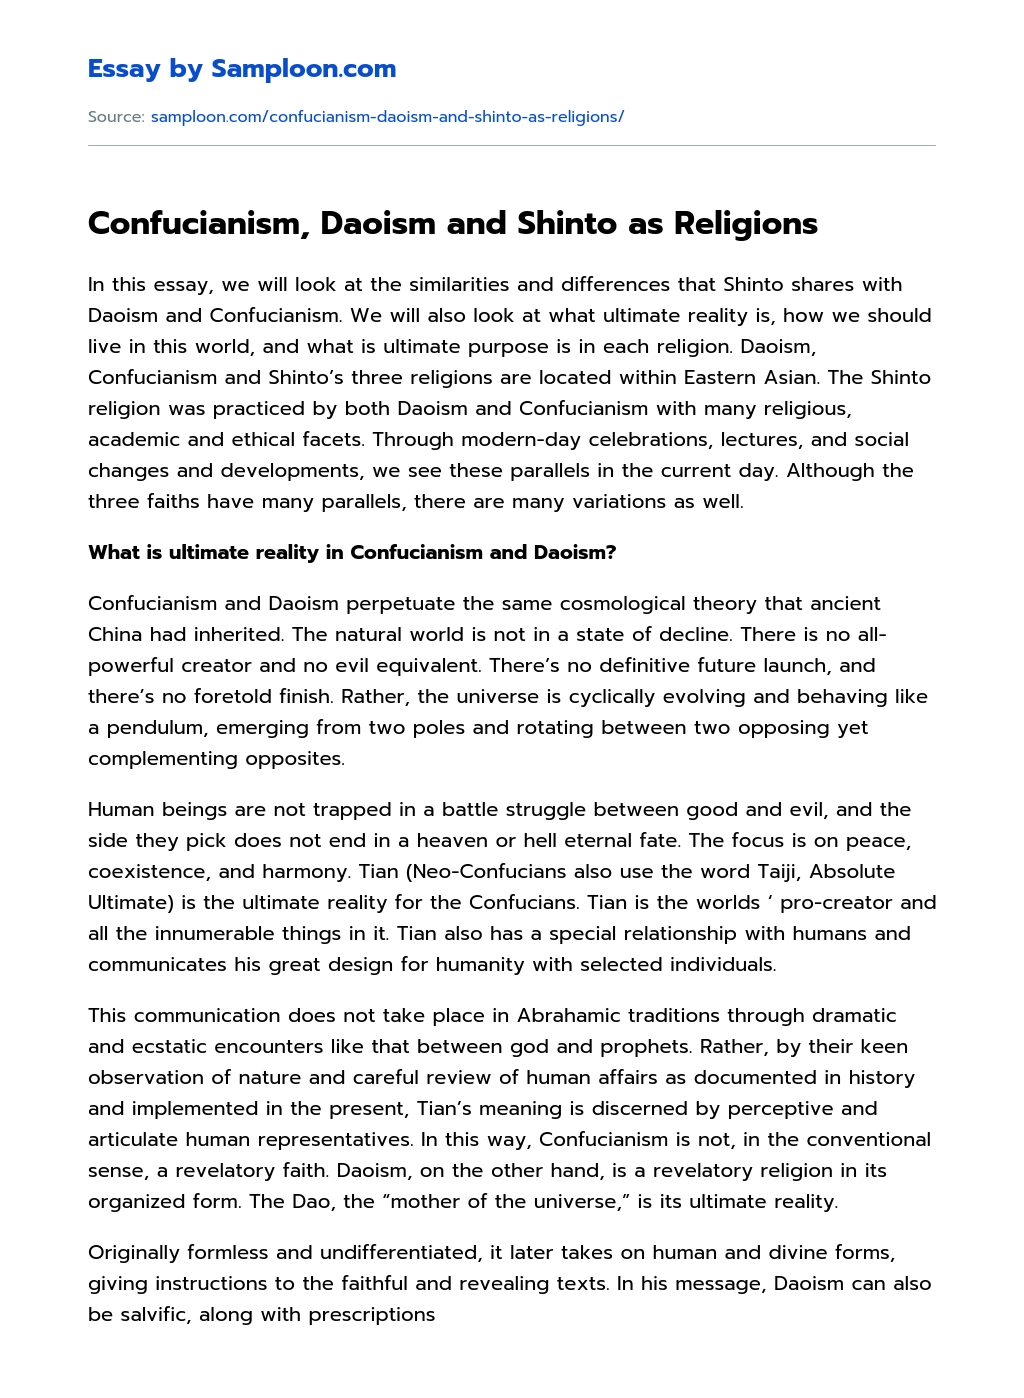 Confucianism, Daoism and Shinto as Religions Compare And Contrast essay